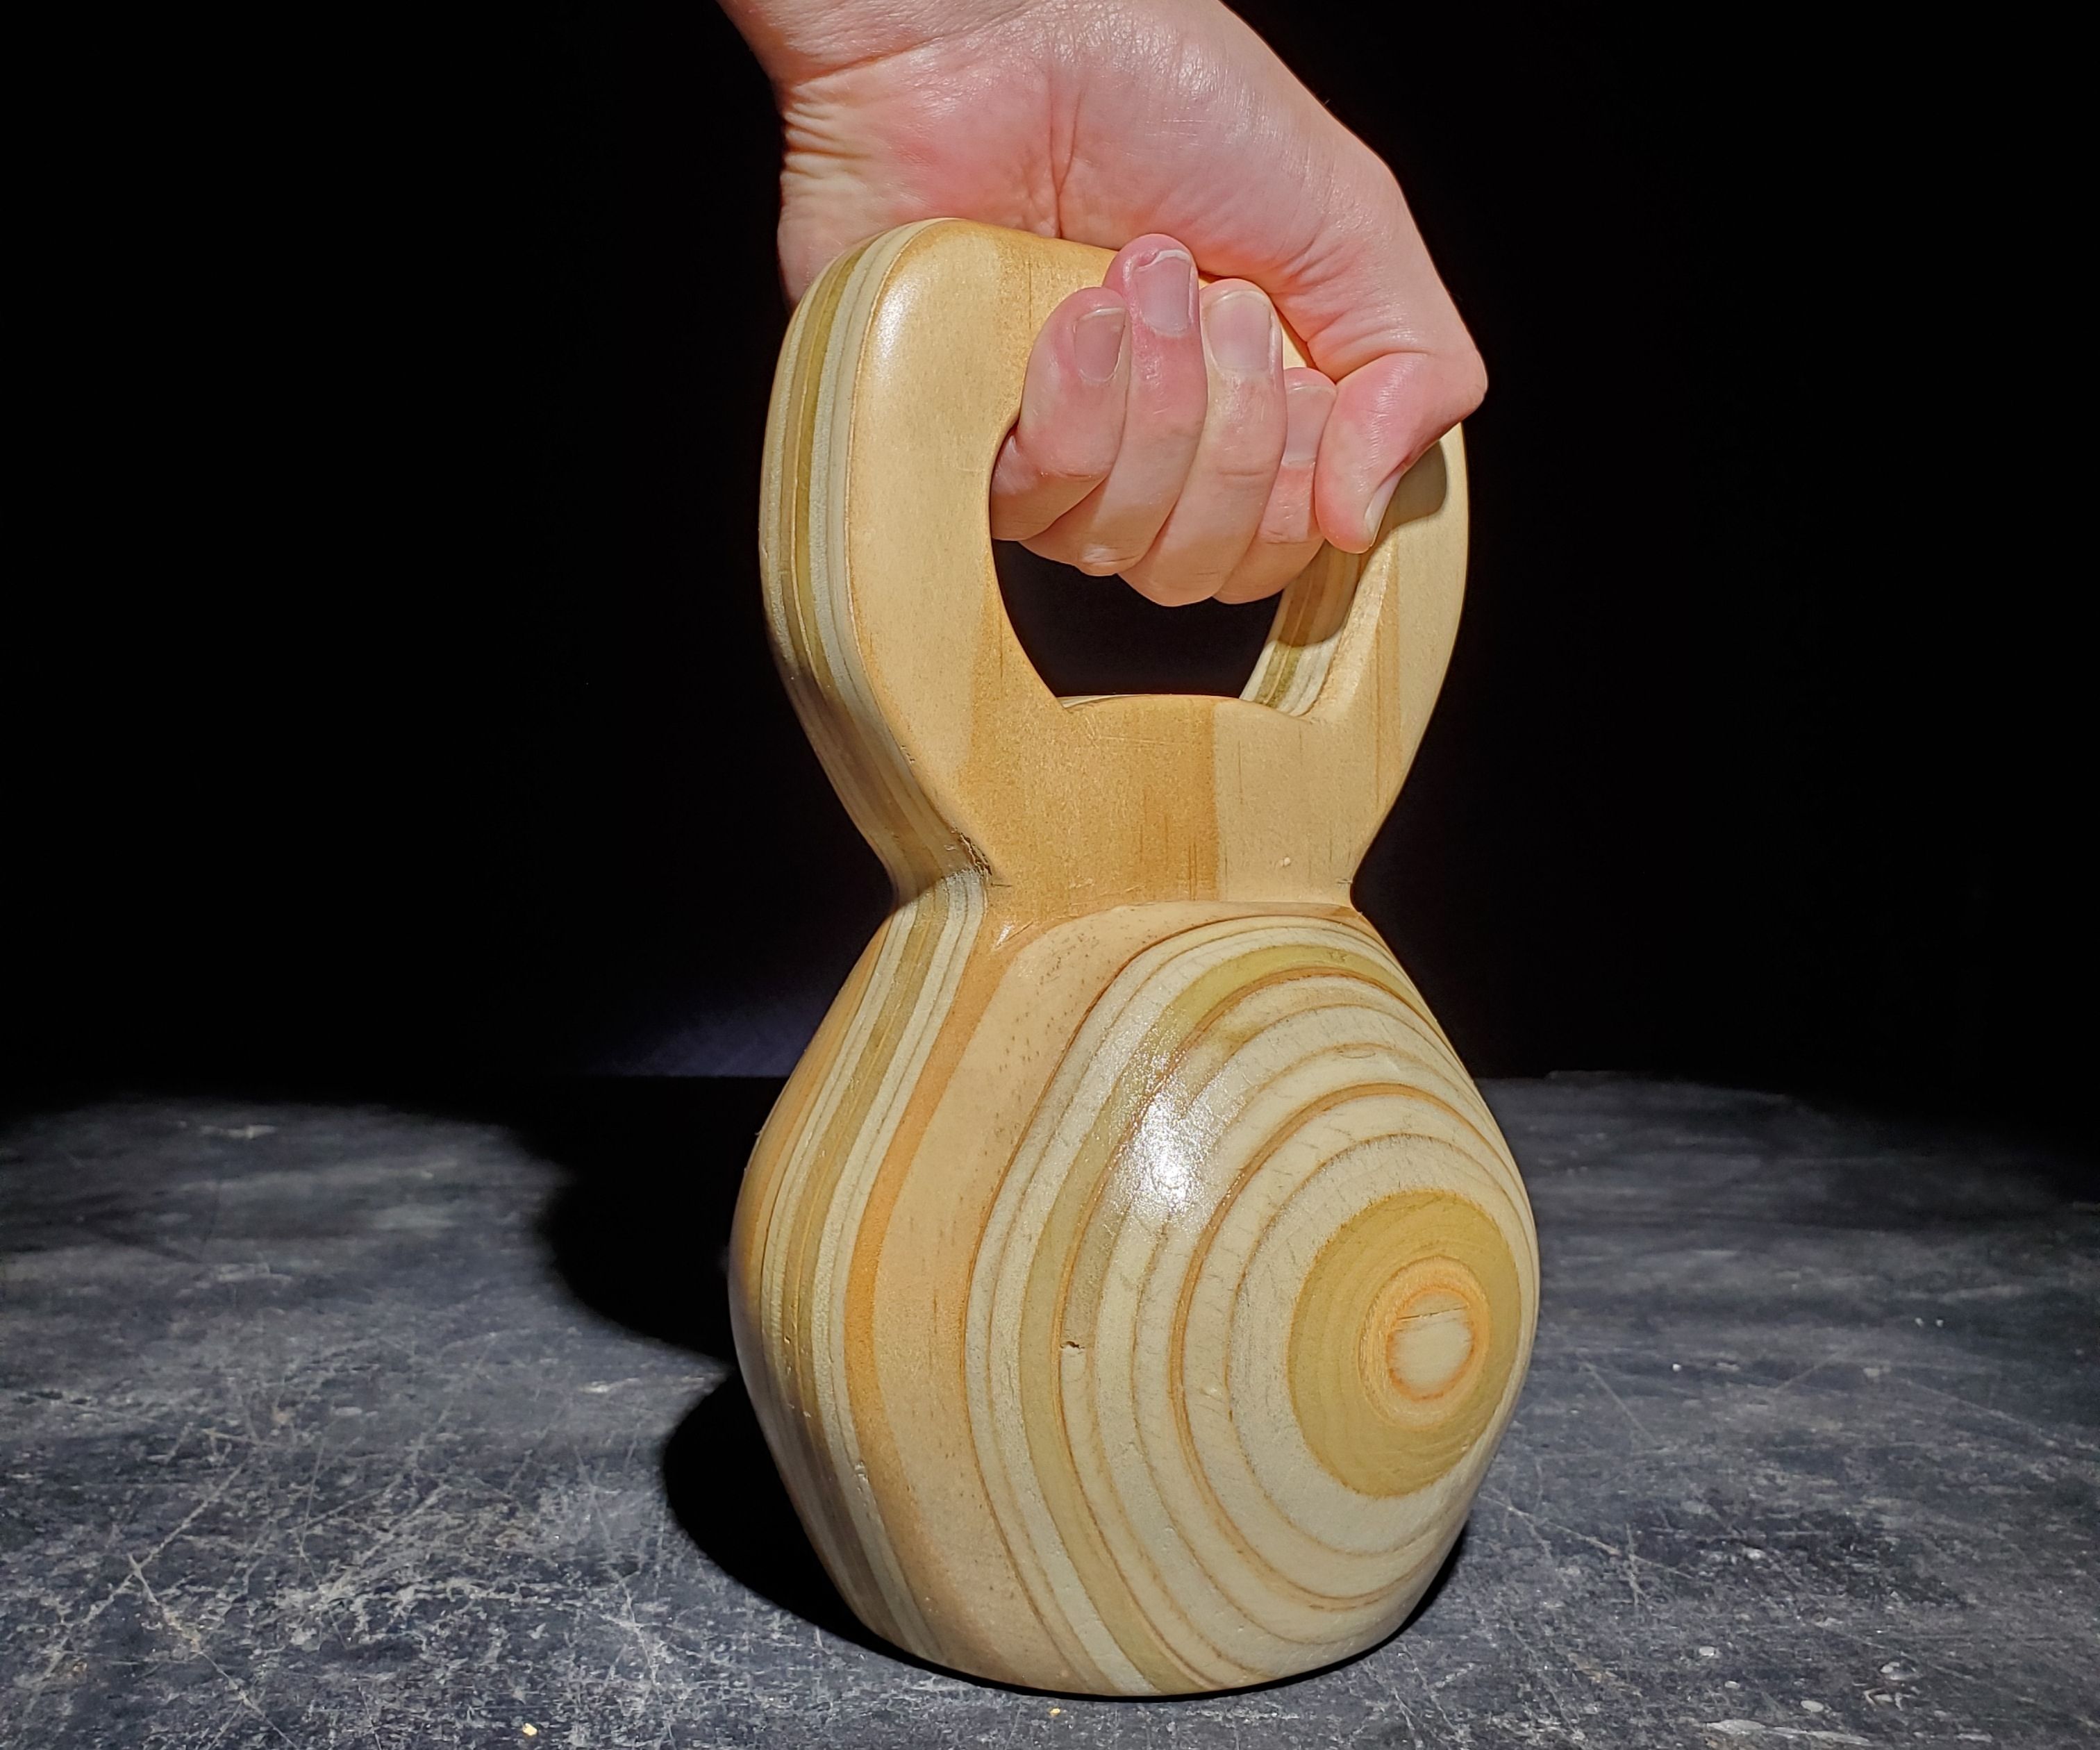 How to Make a Wooden Kettlebell